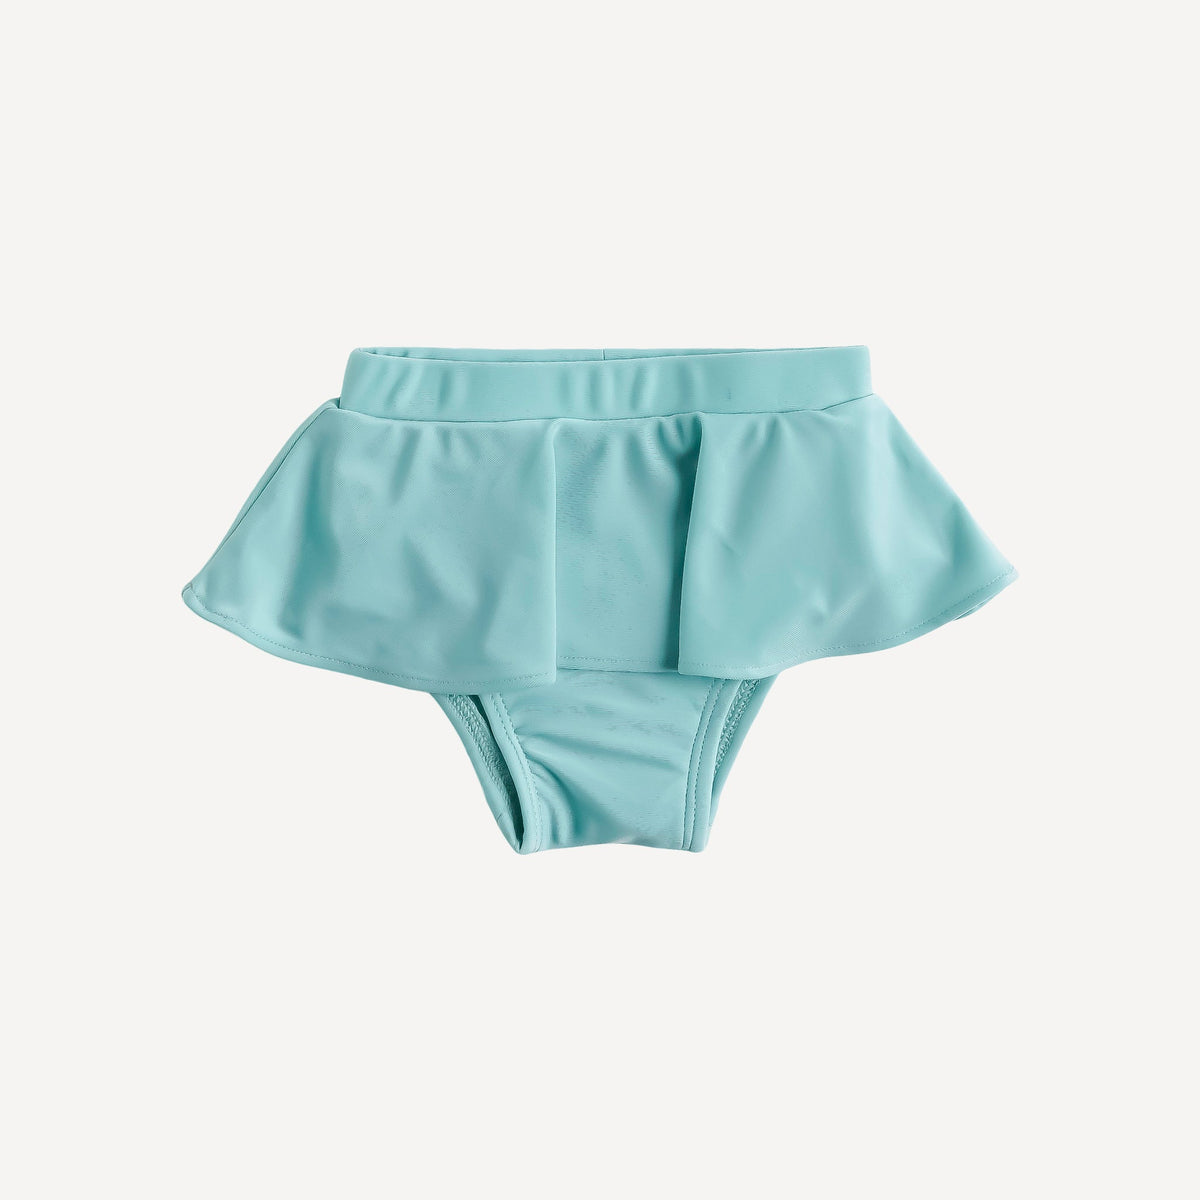 Browse ruffle bottom | surf spray | swim kate quinn and more. Shop in ...